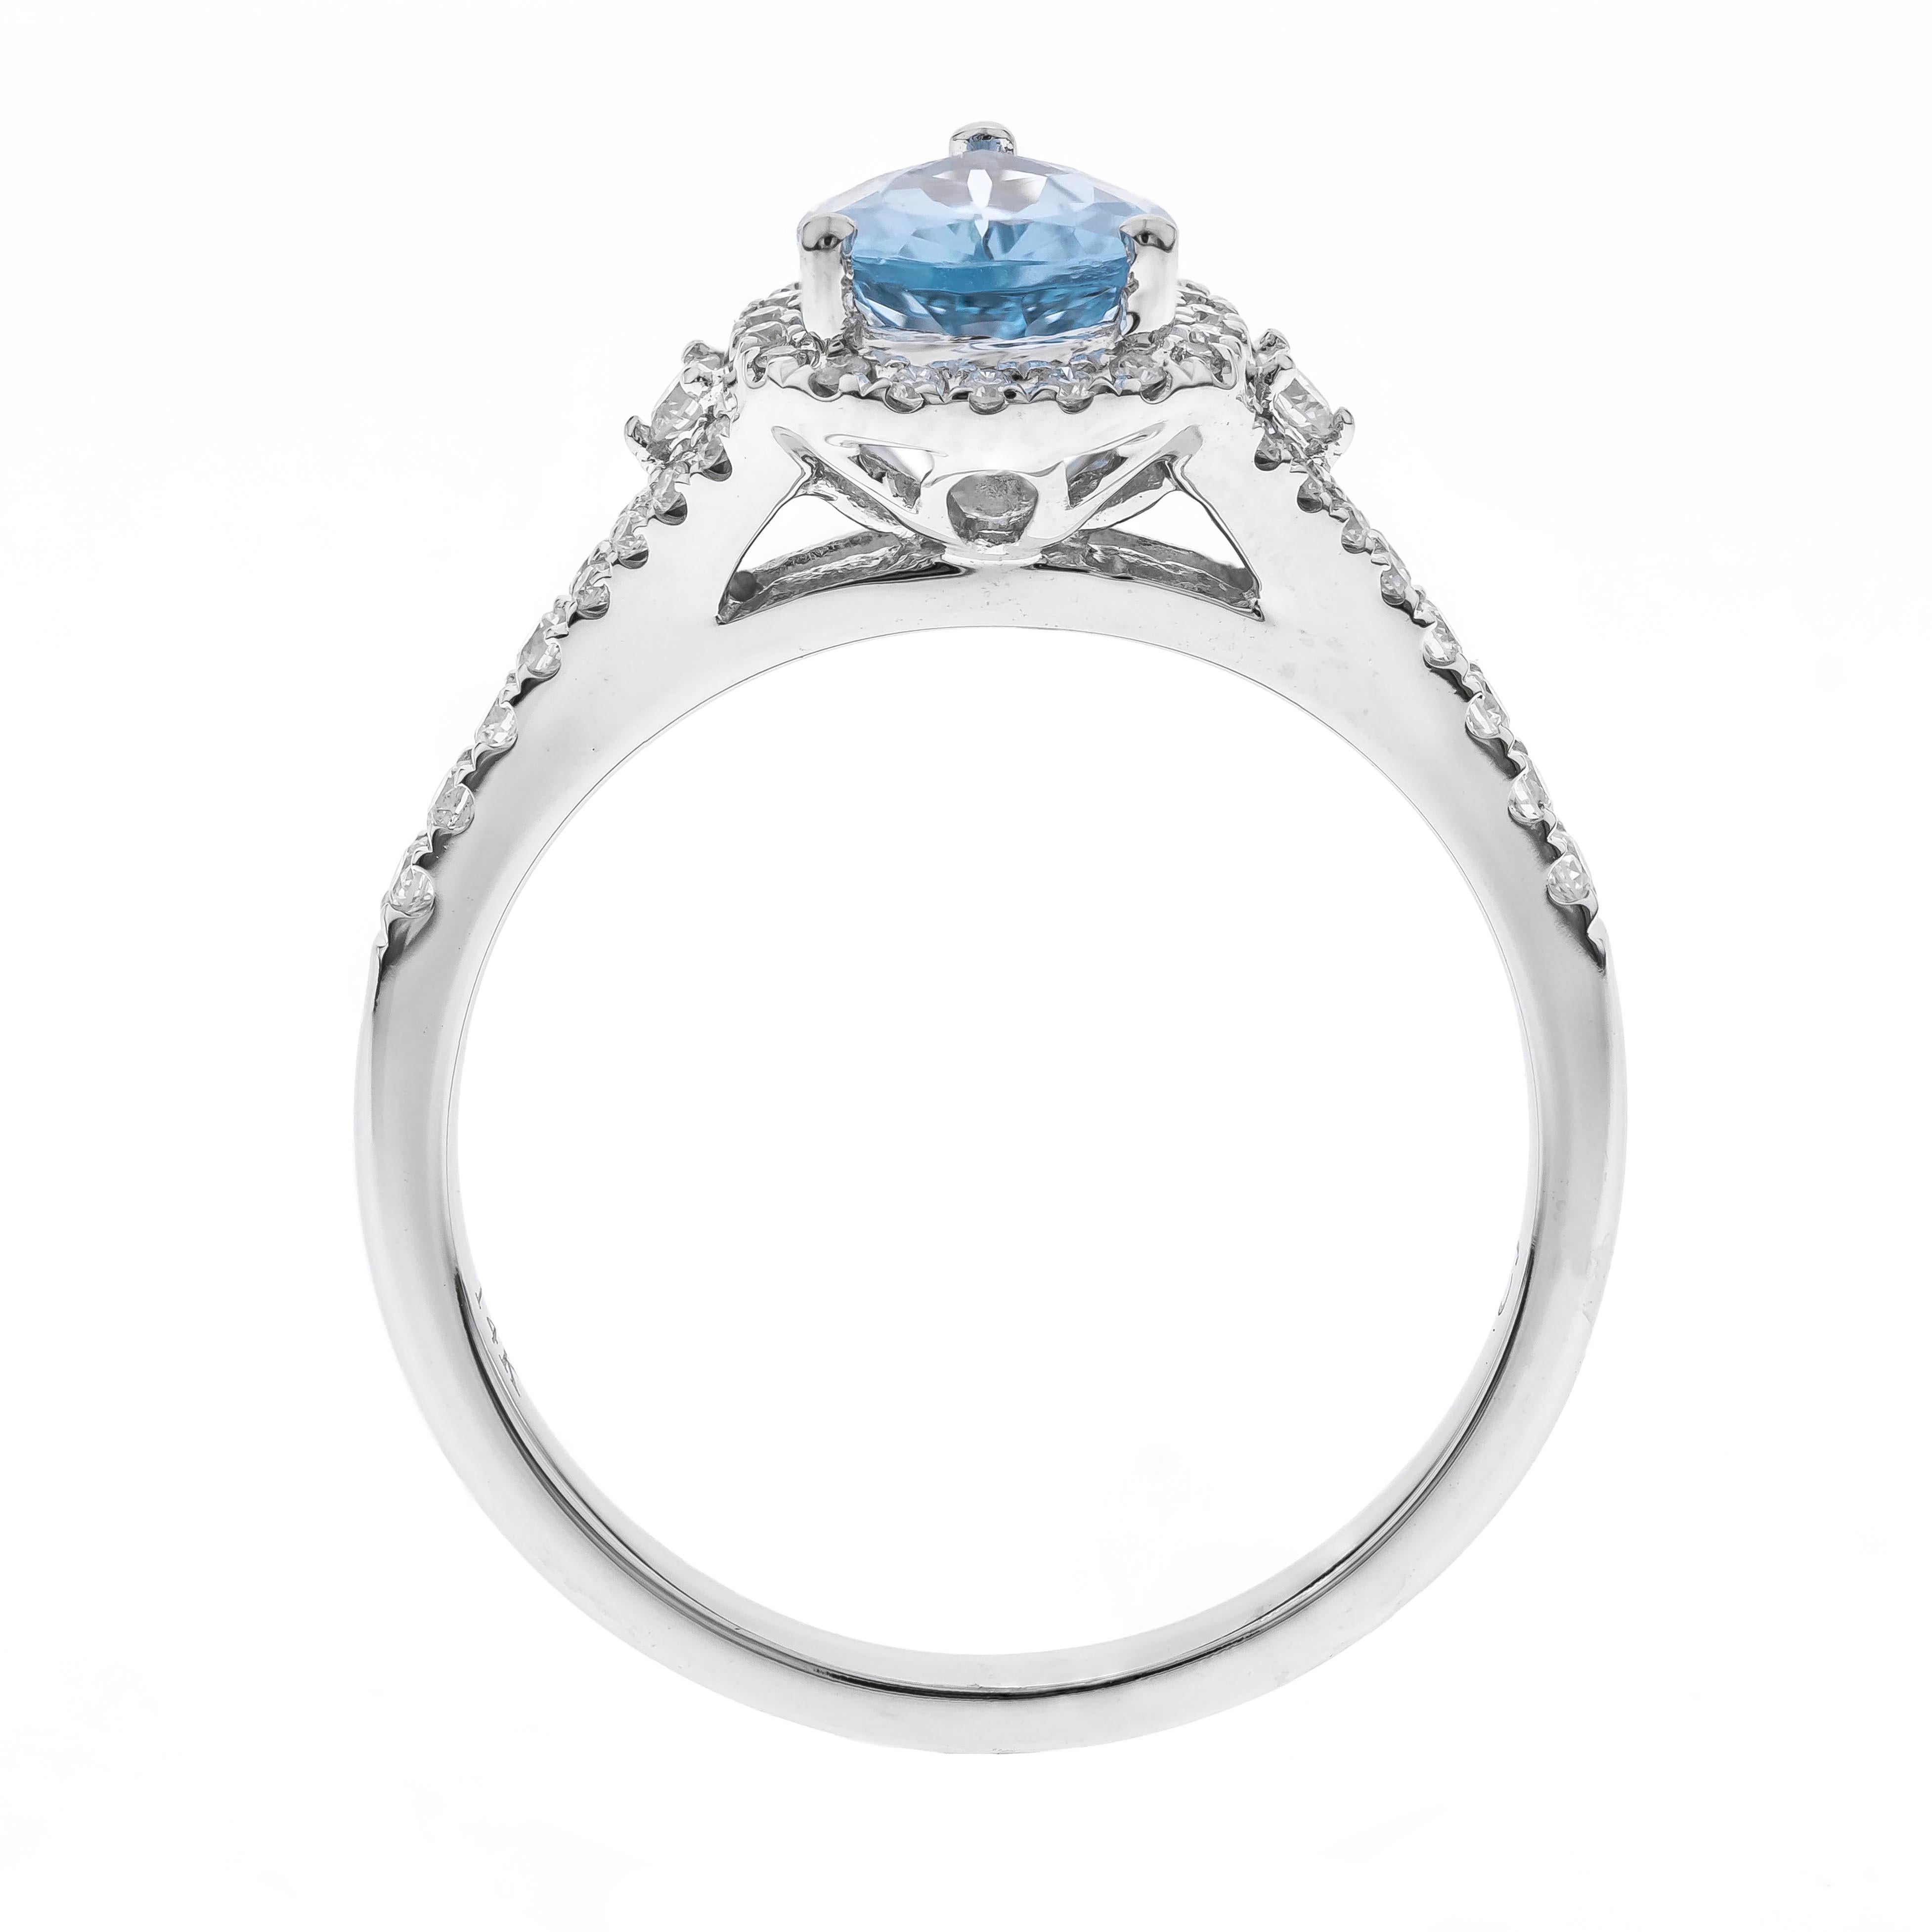 Stunning, timeless and classy eternity Unique ring. Decorate yourself in luxury with this Gin & Grace ring. The 14k White Gold jewelry boasts Fancy Cushion cut London Blue Topaz (1 pcs) 0.92 Carat and Round-Cut Diamond (46 pcs) 0.31 Carat accent